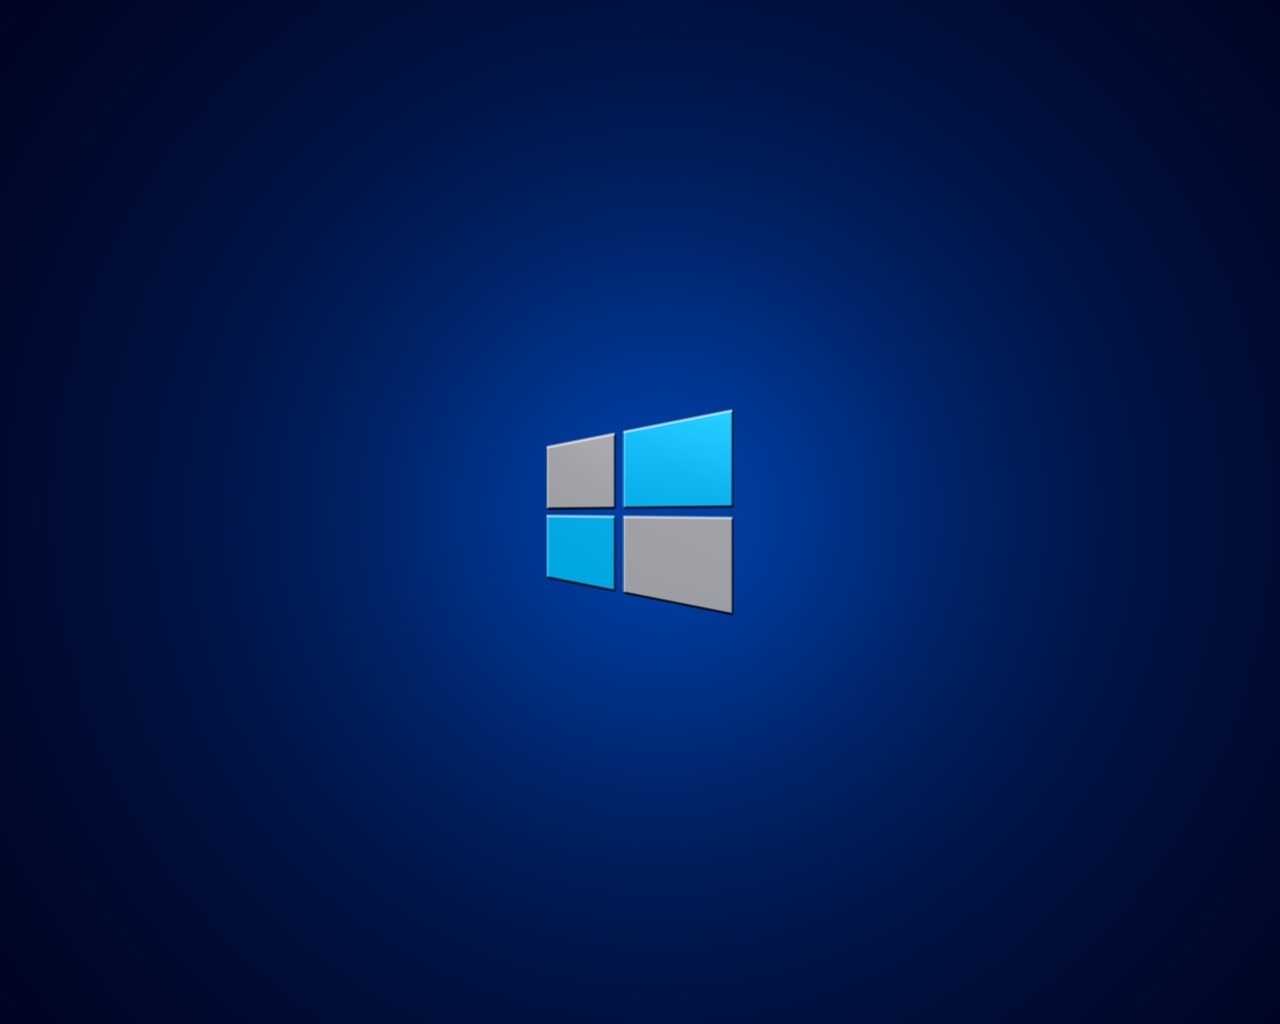 Windows 8 Background for 1280 x 1024 resolution